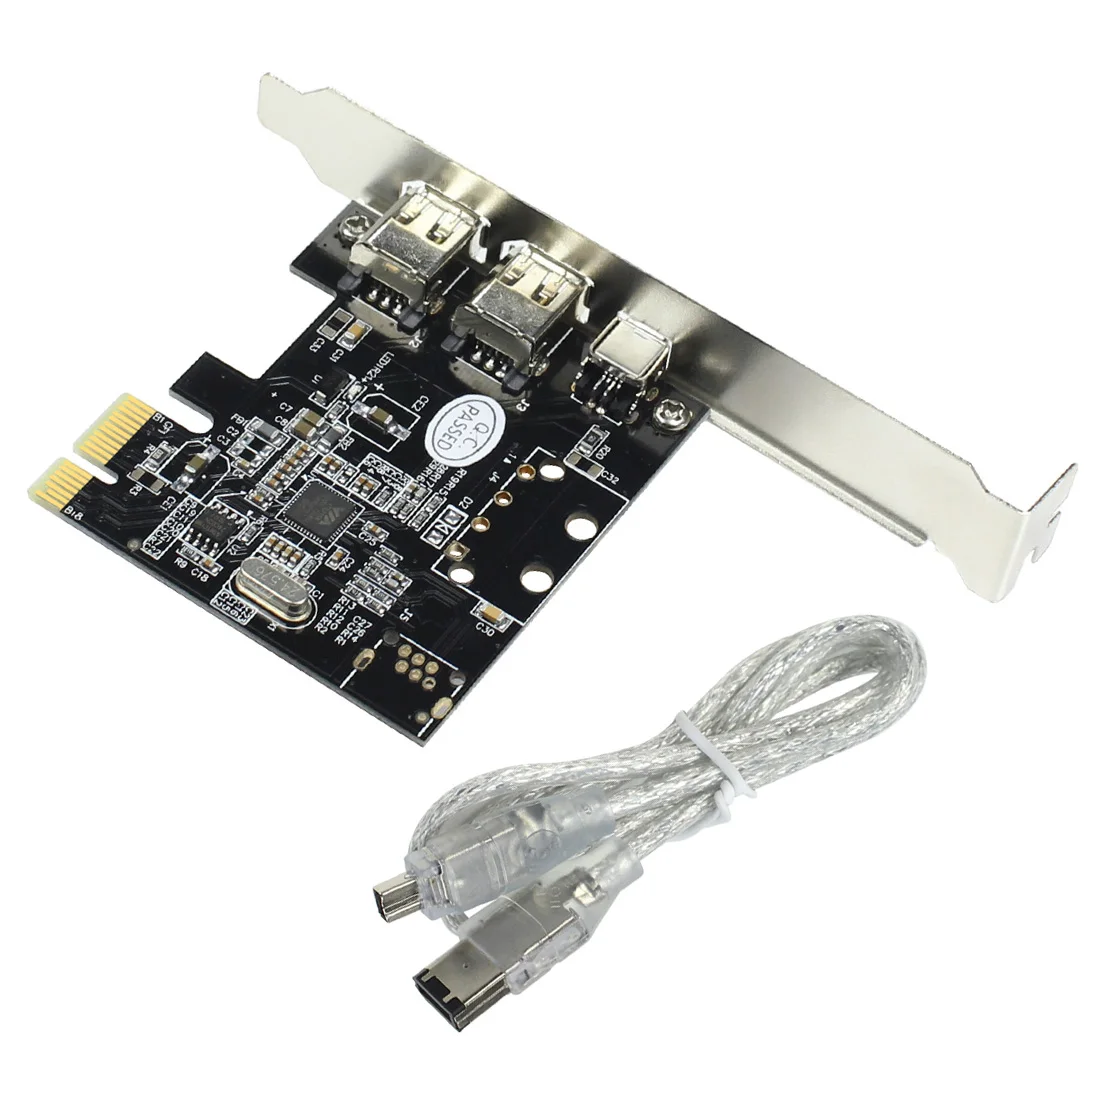 

Expansion Card PCIe 3 Ports 1394A Firewire PCI Express to IEEE 1394 Adapter Controller 2 x 6 Pin And 1 x 4 Pin